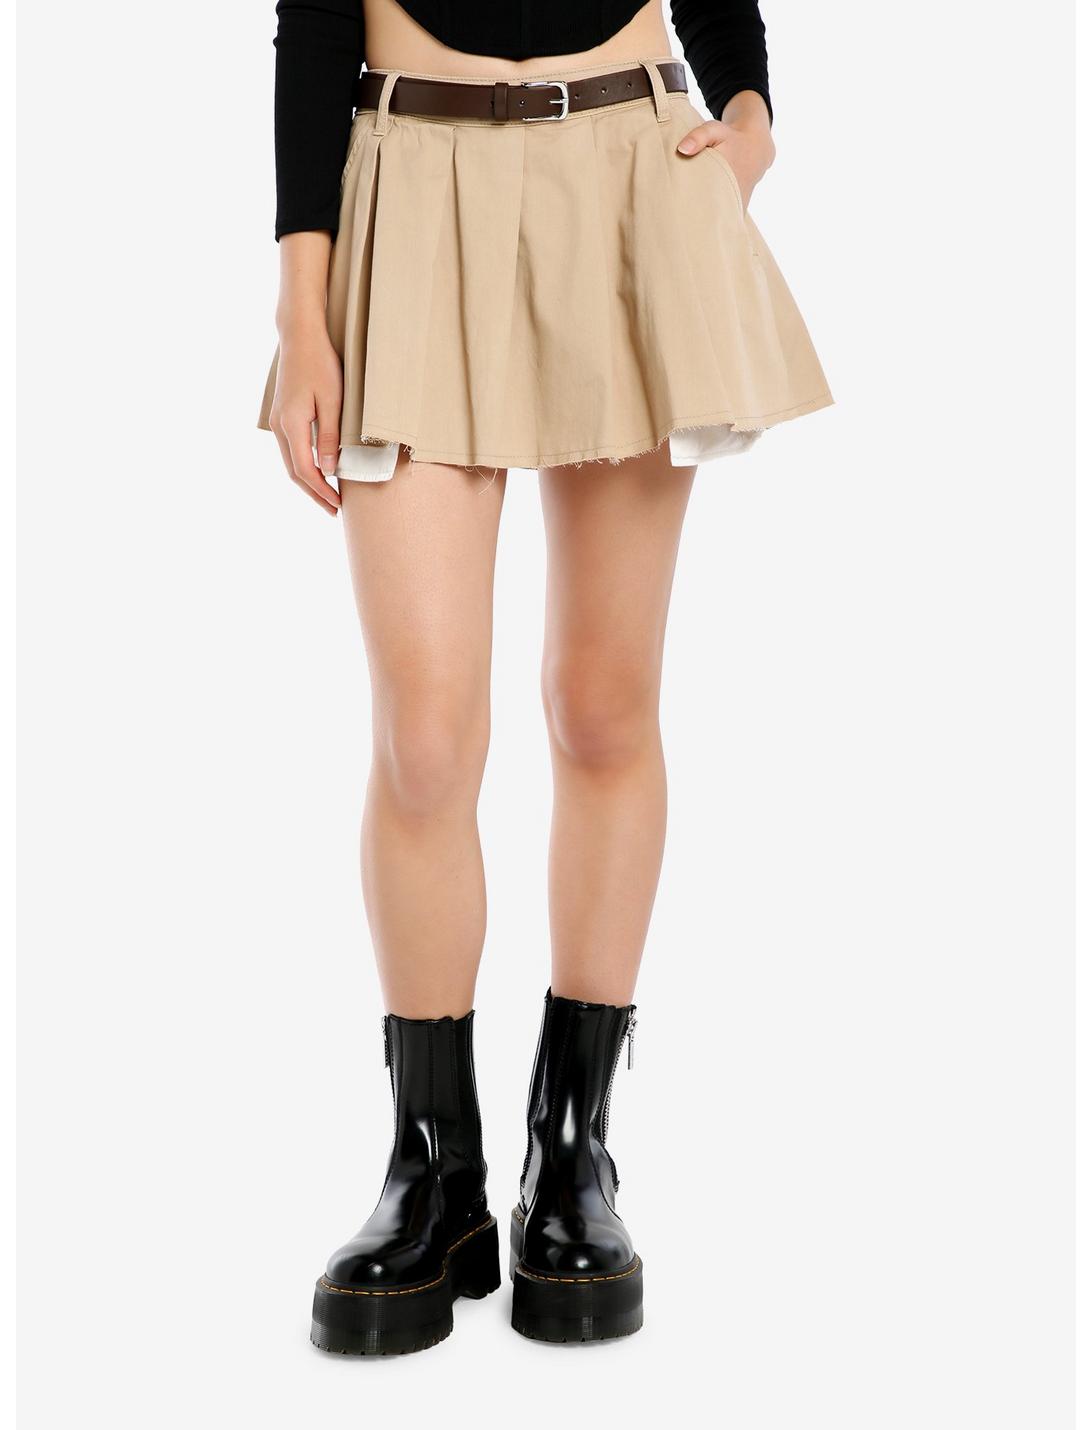 Social Collision Khaki Belted Low-Rise Pleated Mini Skirt, BROWN, hi-res